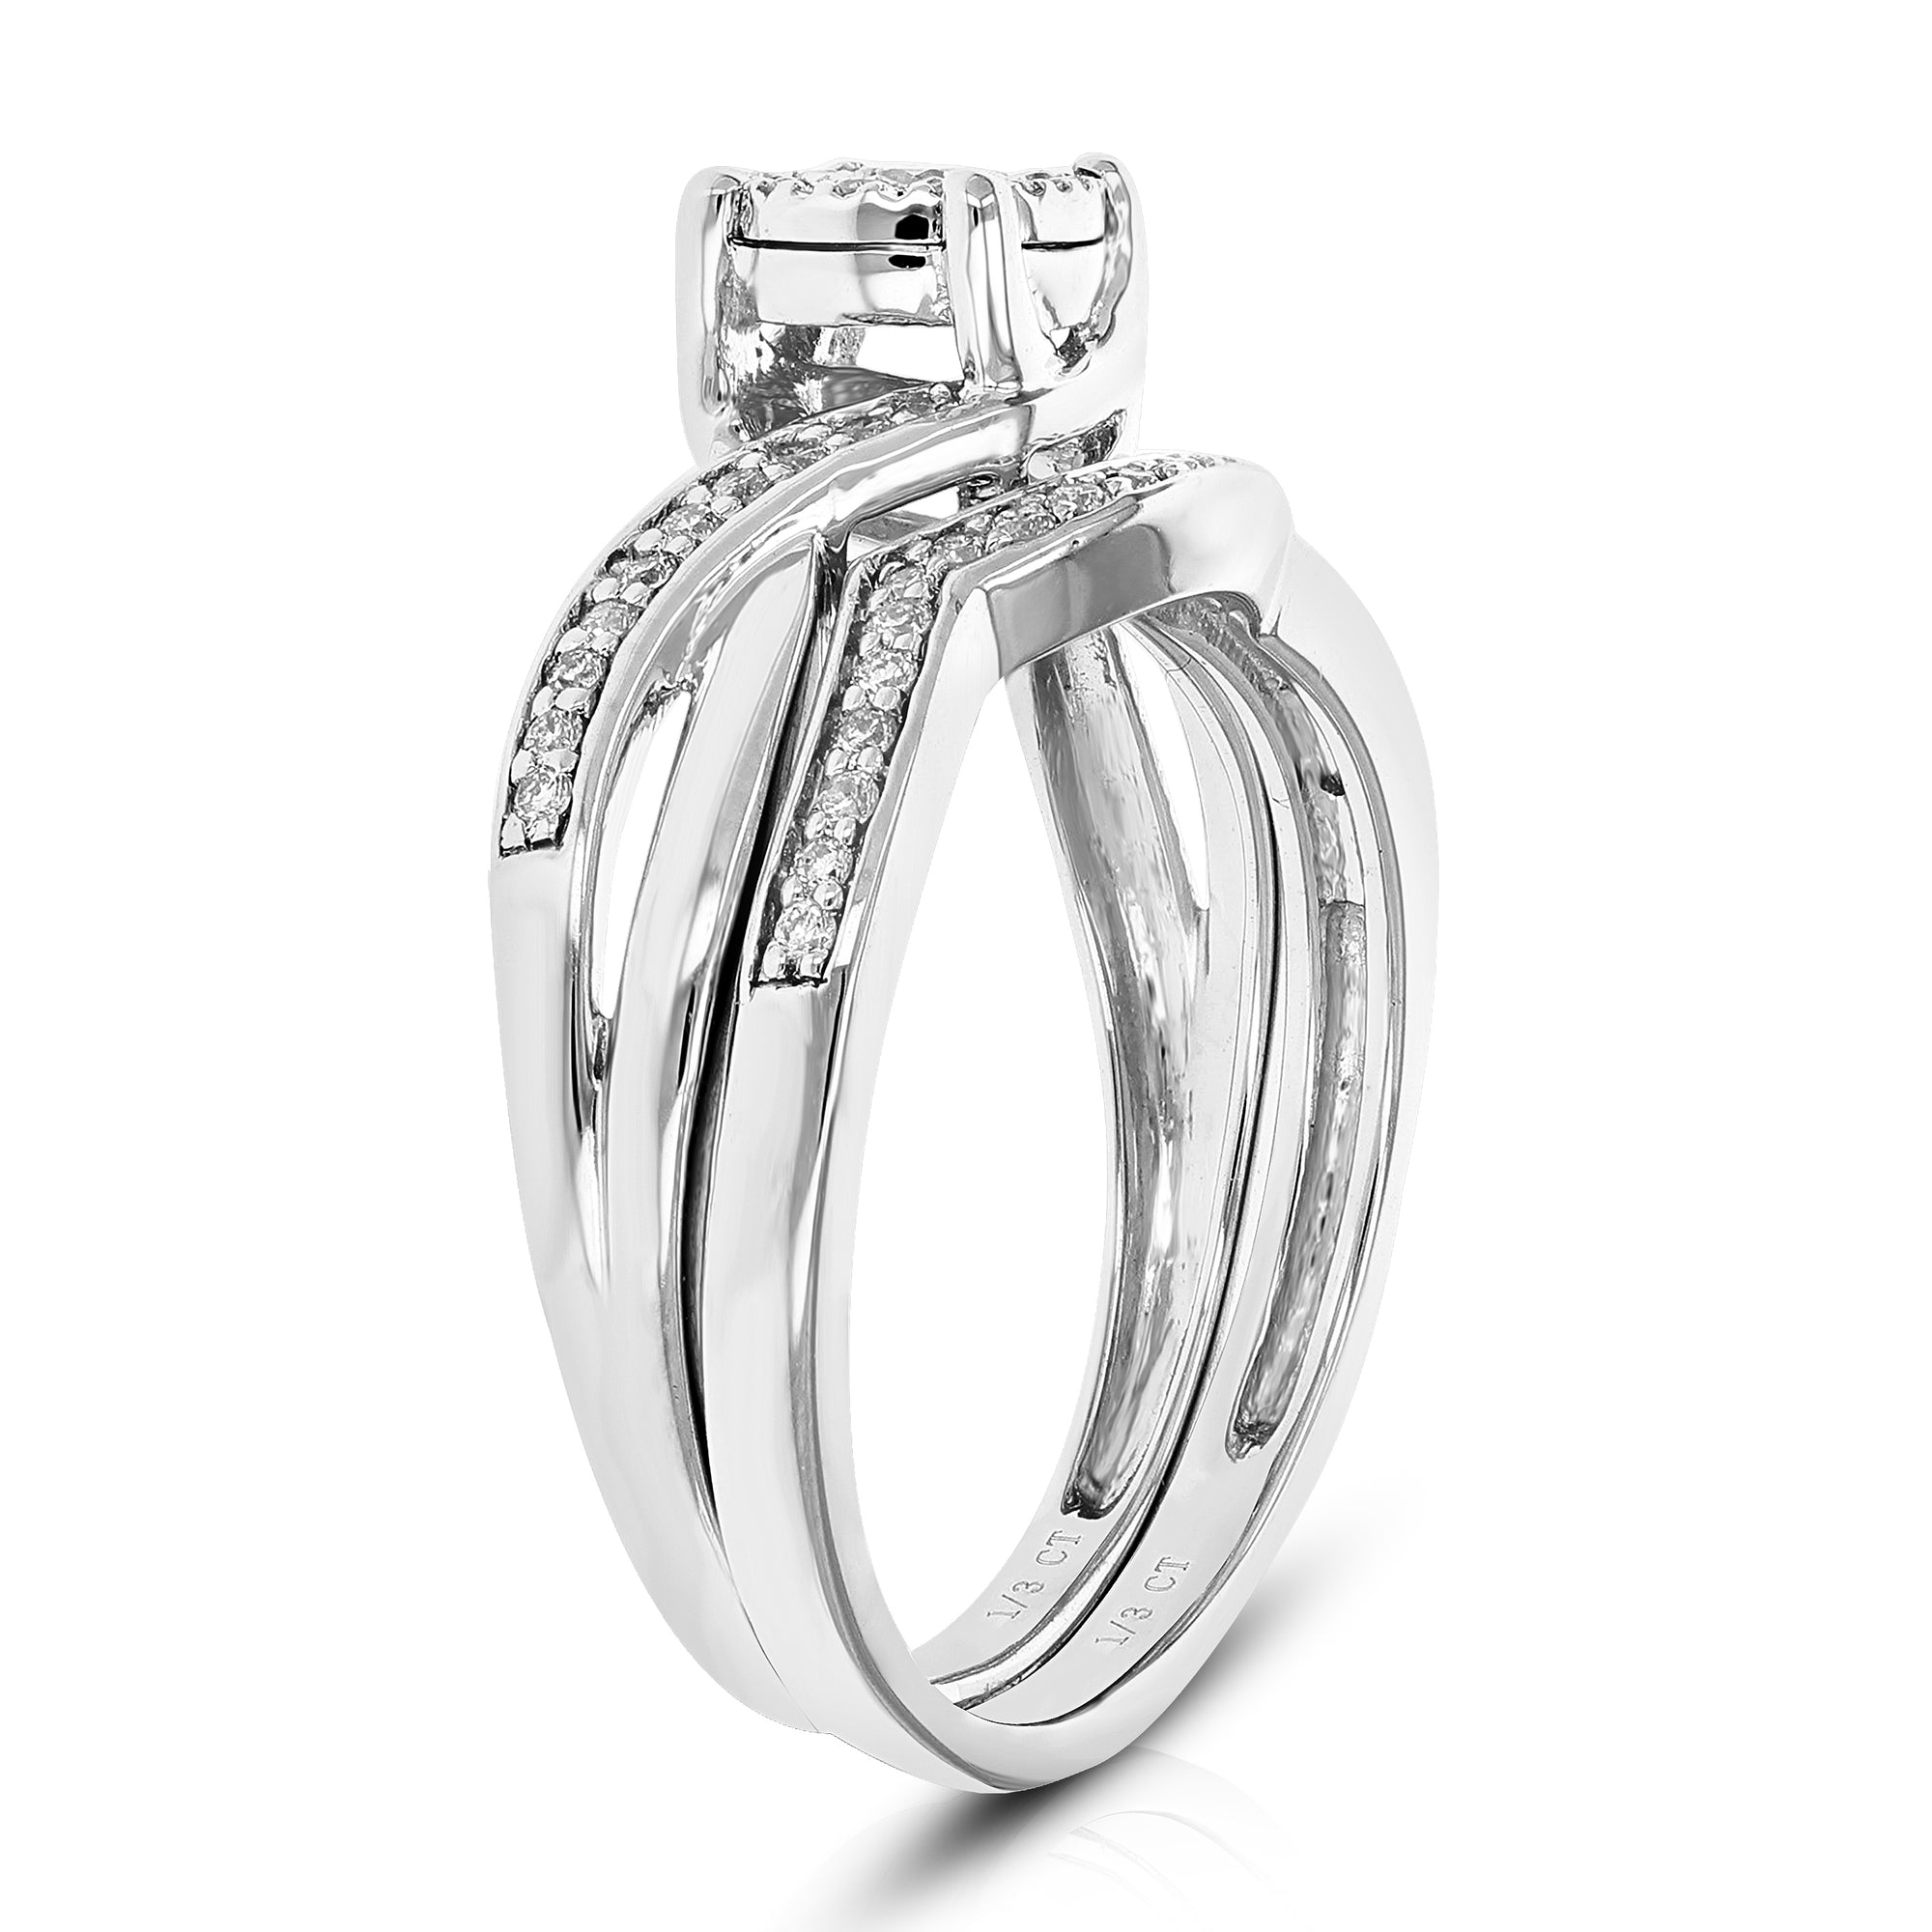 1/3 cttw Wedding Engagement Ring Bridal Set, Round Lab Grown Diamond Ring for Women in .925 Sterling Silver, Prong Setting, Size 6-8